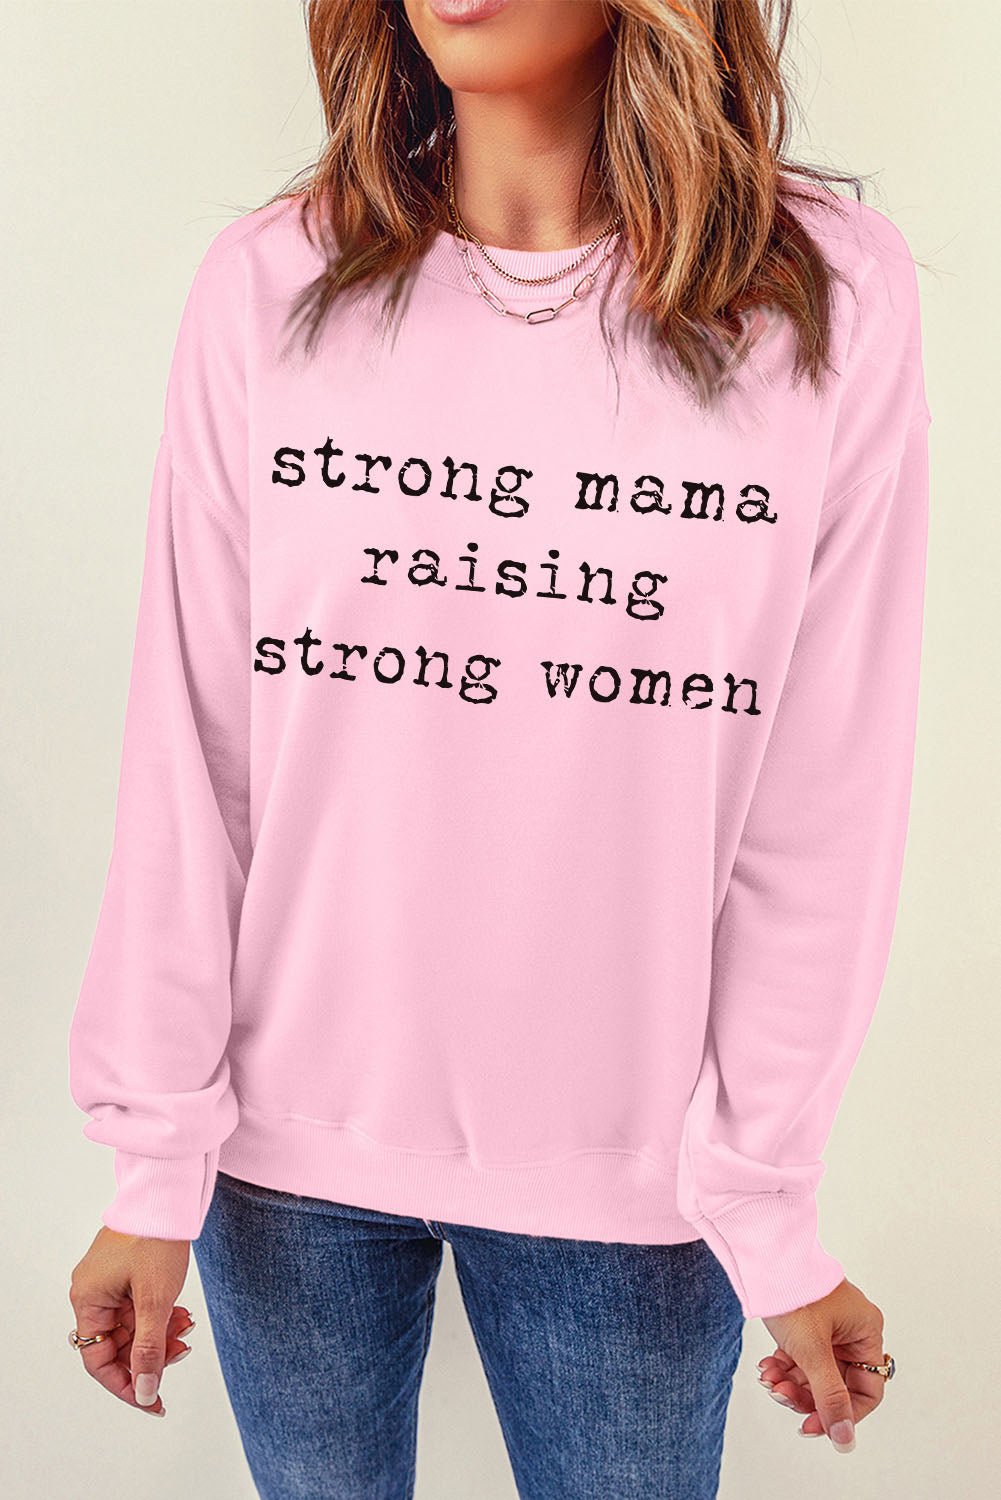 "Strong Mama Raising Strong Women Graphic Sweatshirt - A Tribute to Motherhood and Femininity, Celebrating the Unbreakable Bond with Your Little Girls" - Guy Christopher